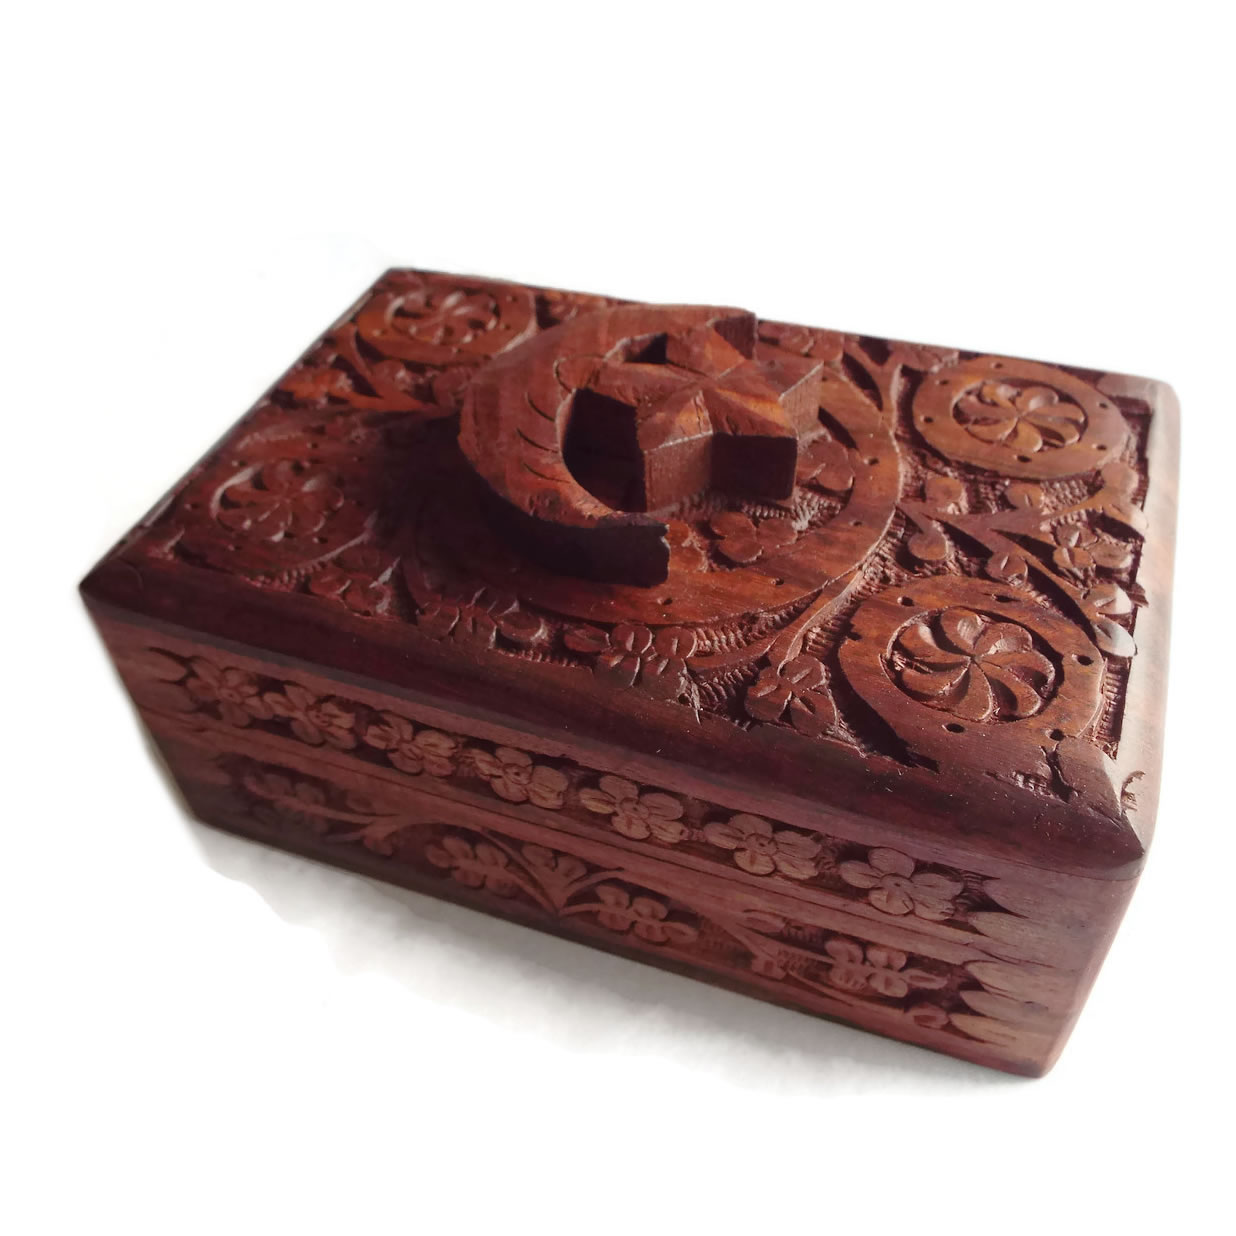 Carved Wooden Box with Moon and Star